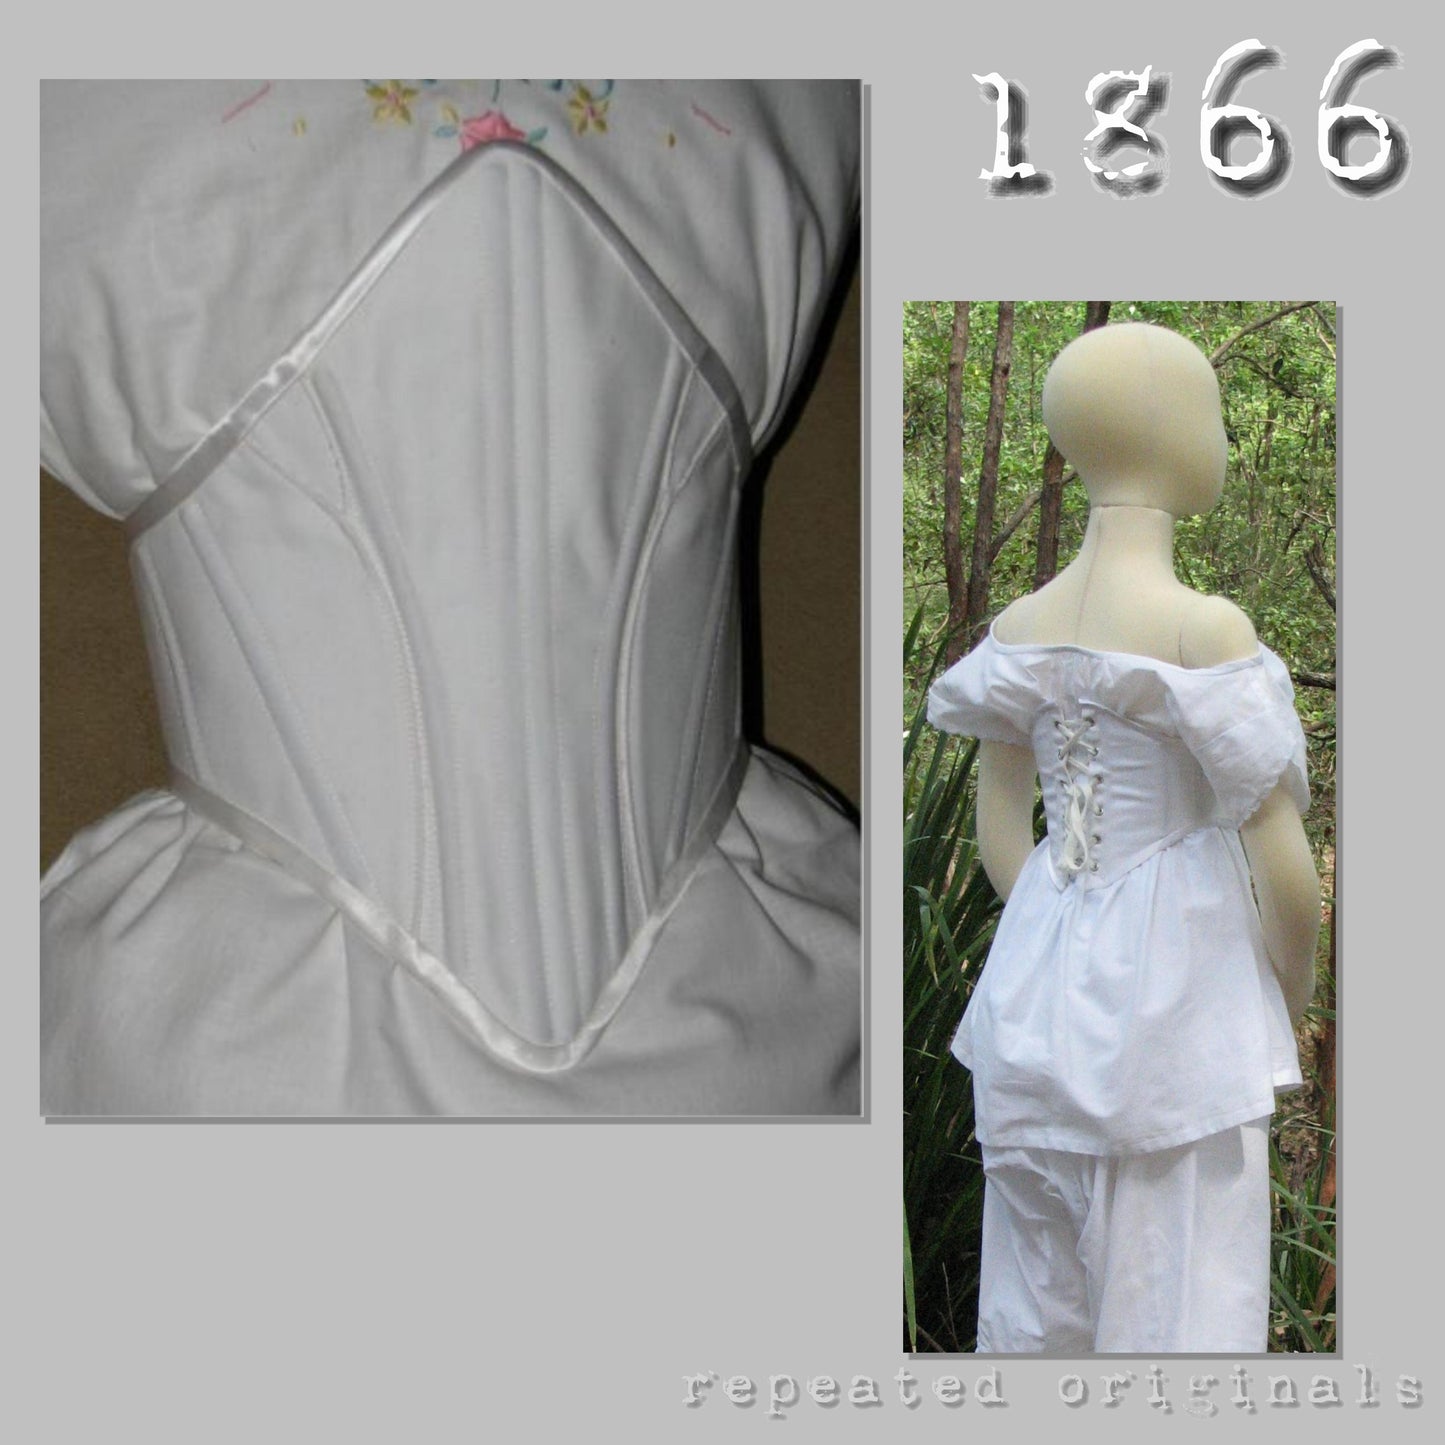 1866 Corset for Girl 10 - 12 Years Sewing Pattern - INSTANT DOWNLOAD PDF